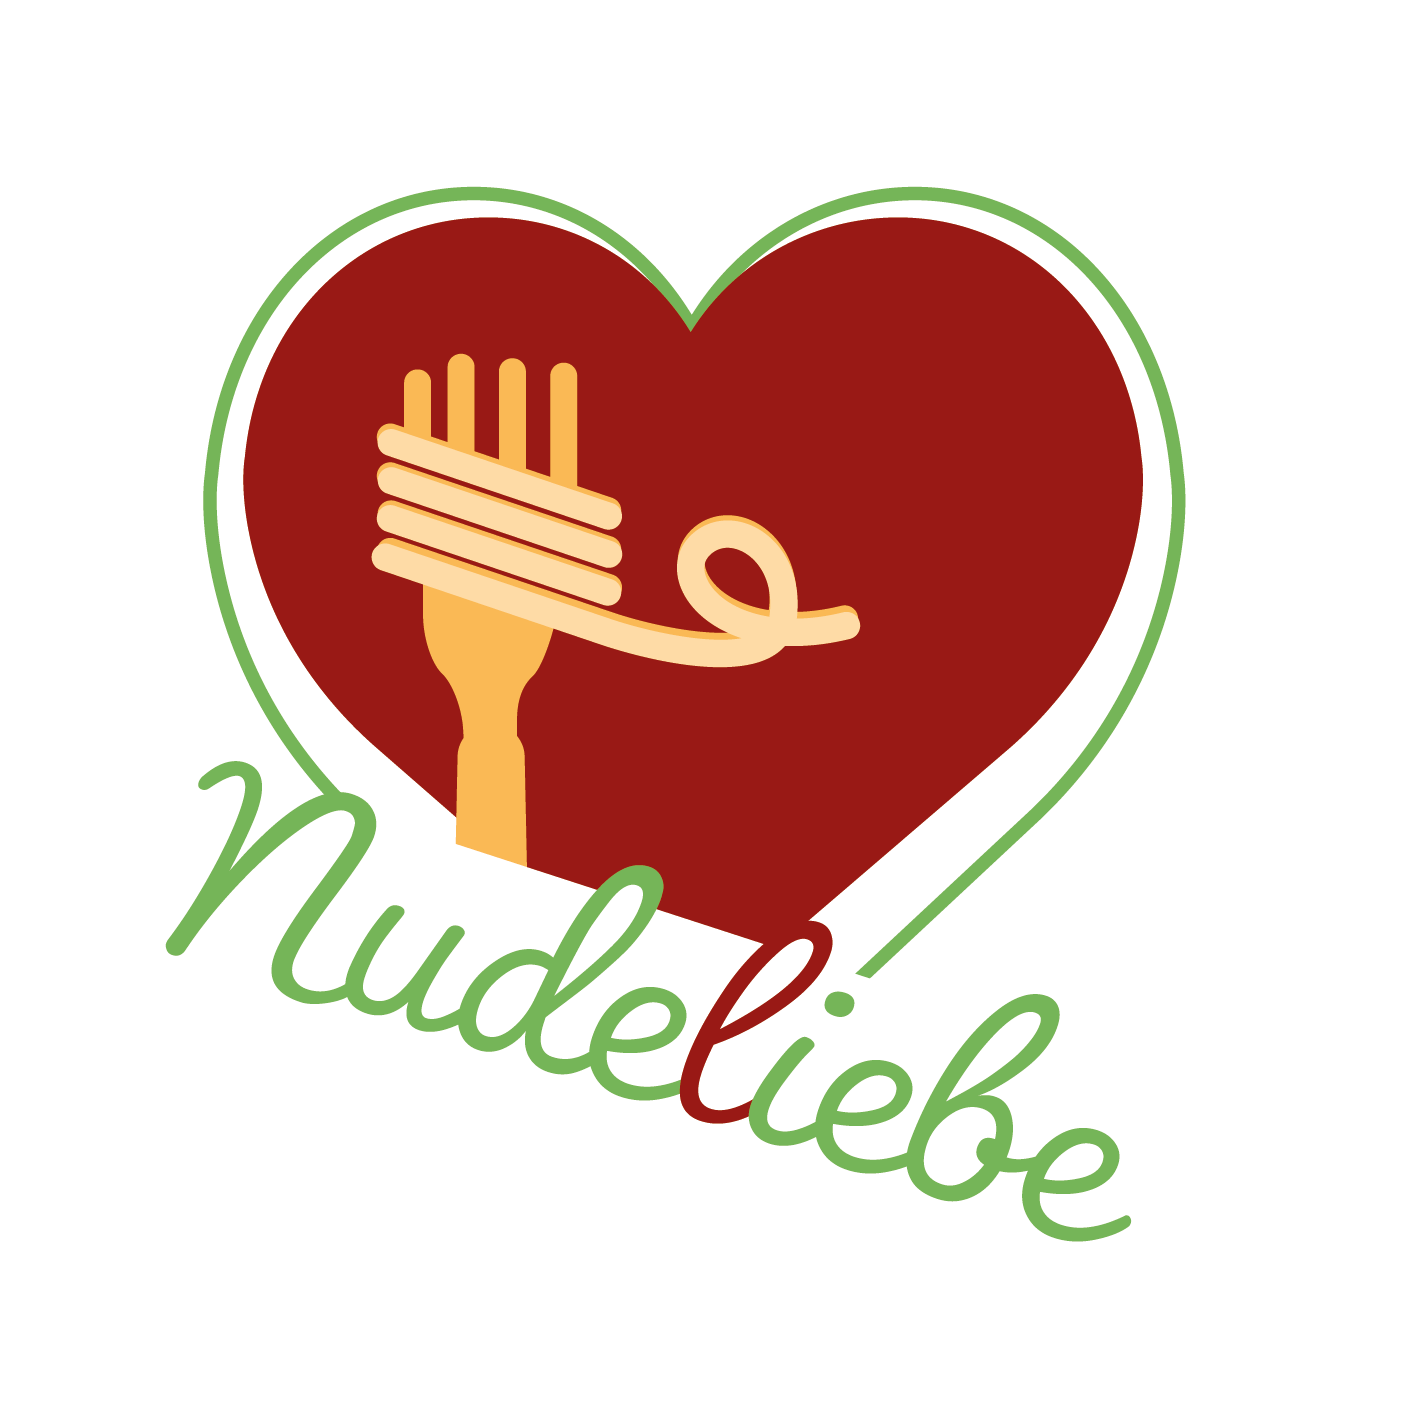 Nudelliebe